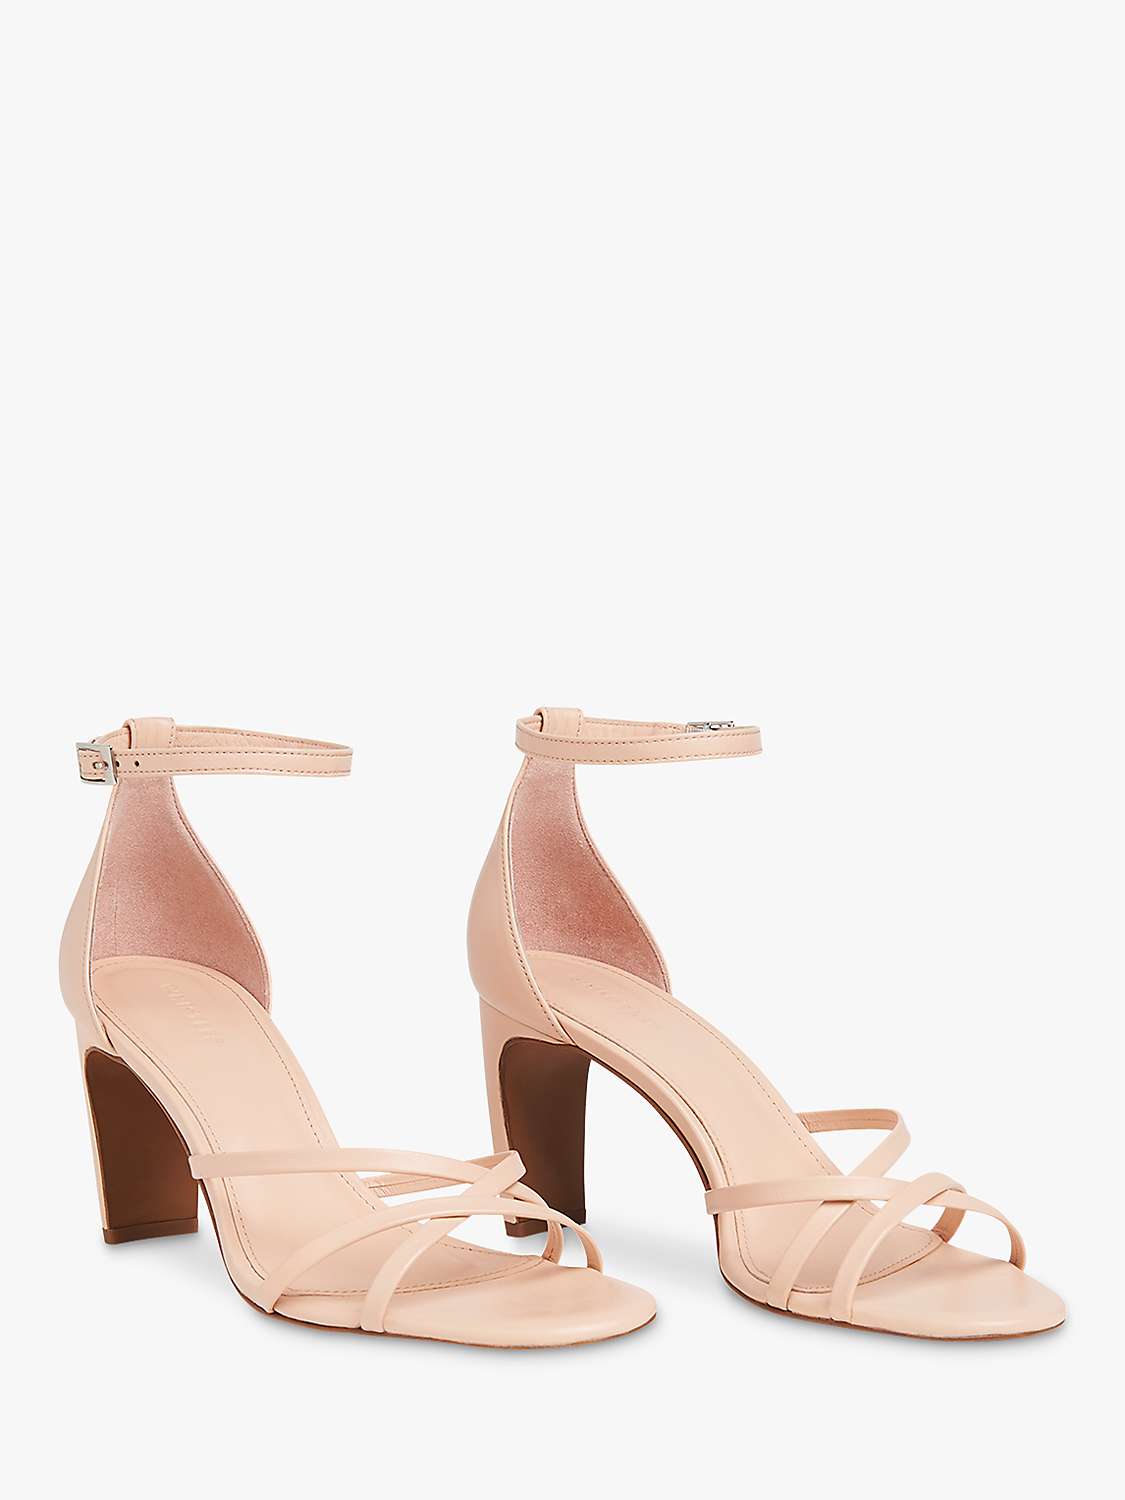 Buy Whistles Hallie Leather Strappy Sandals Online at johnlewis.com